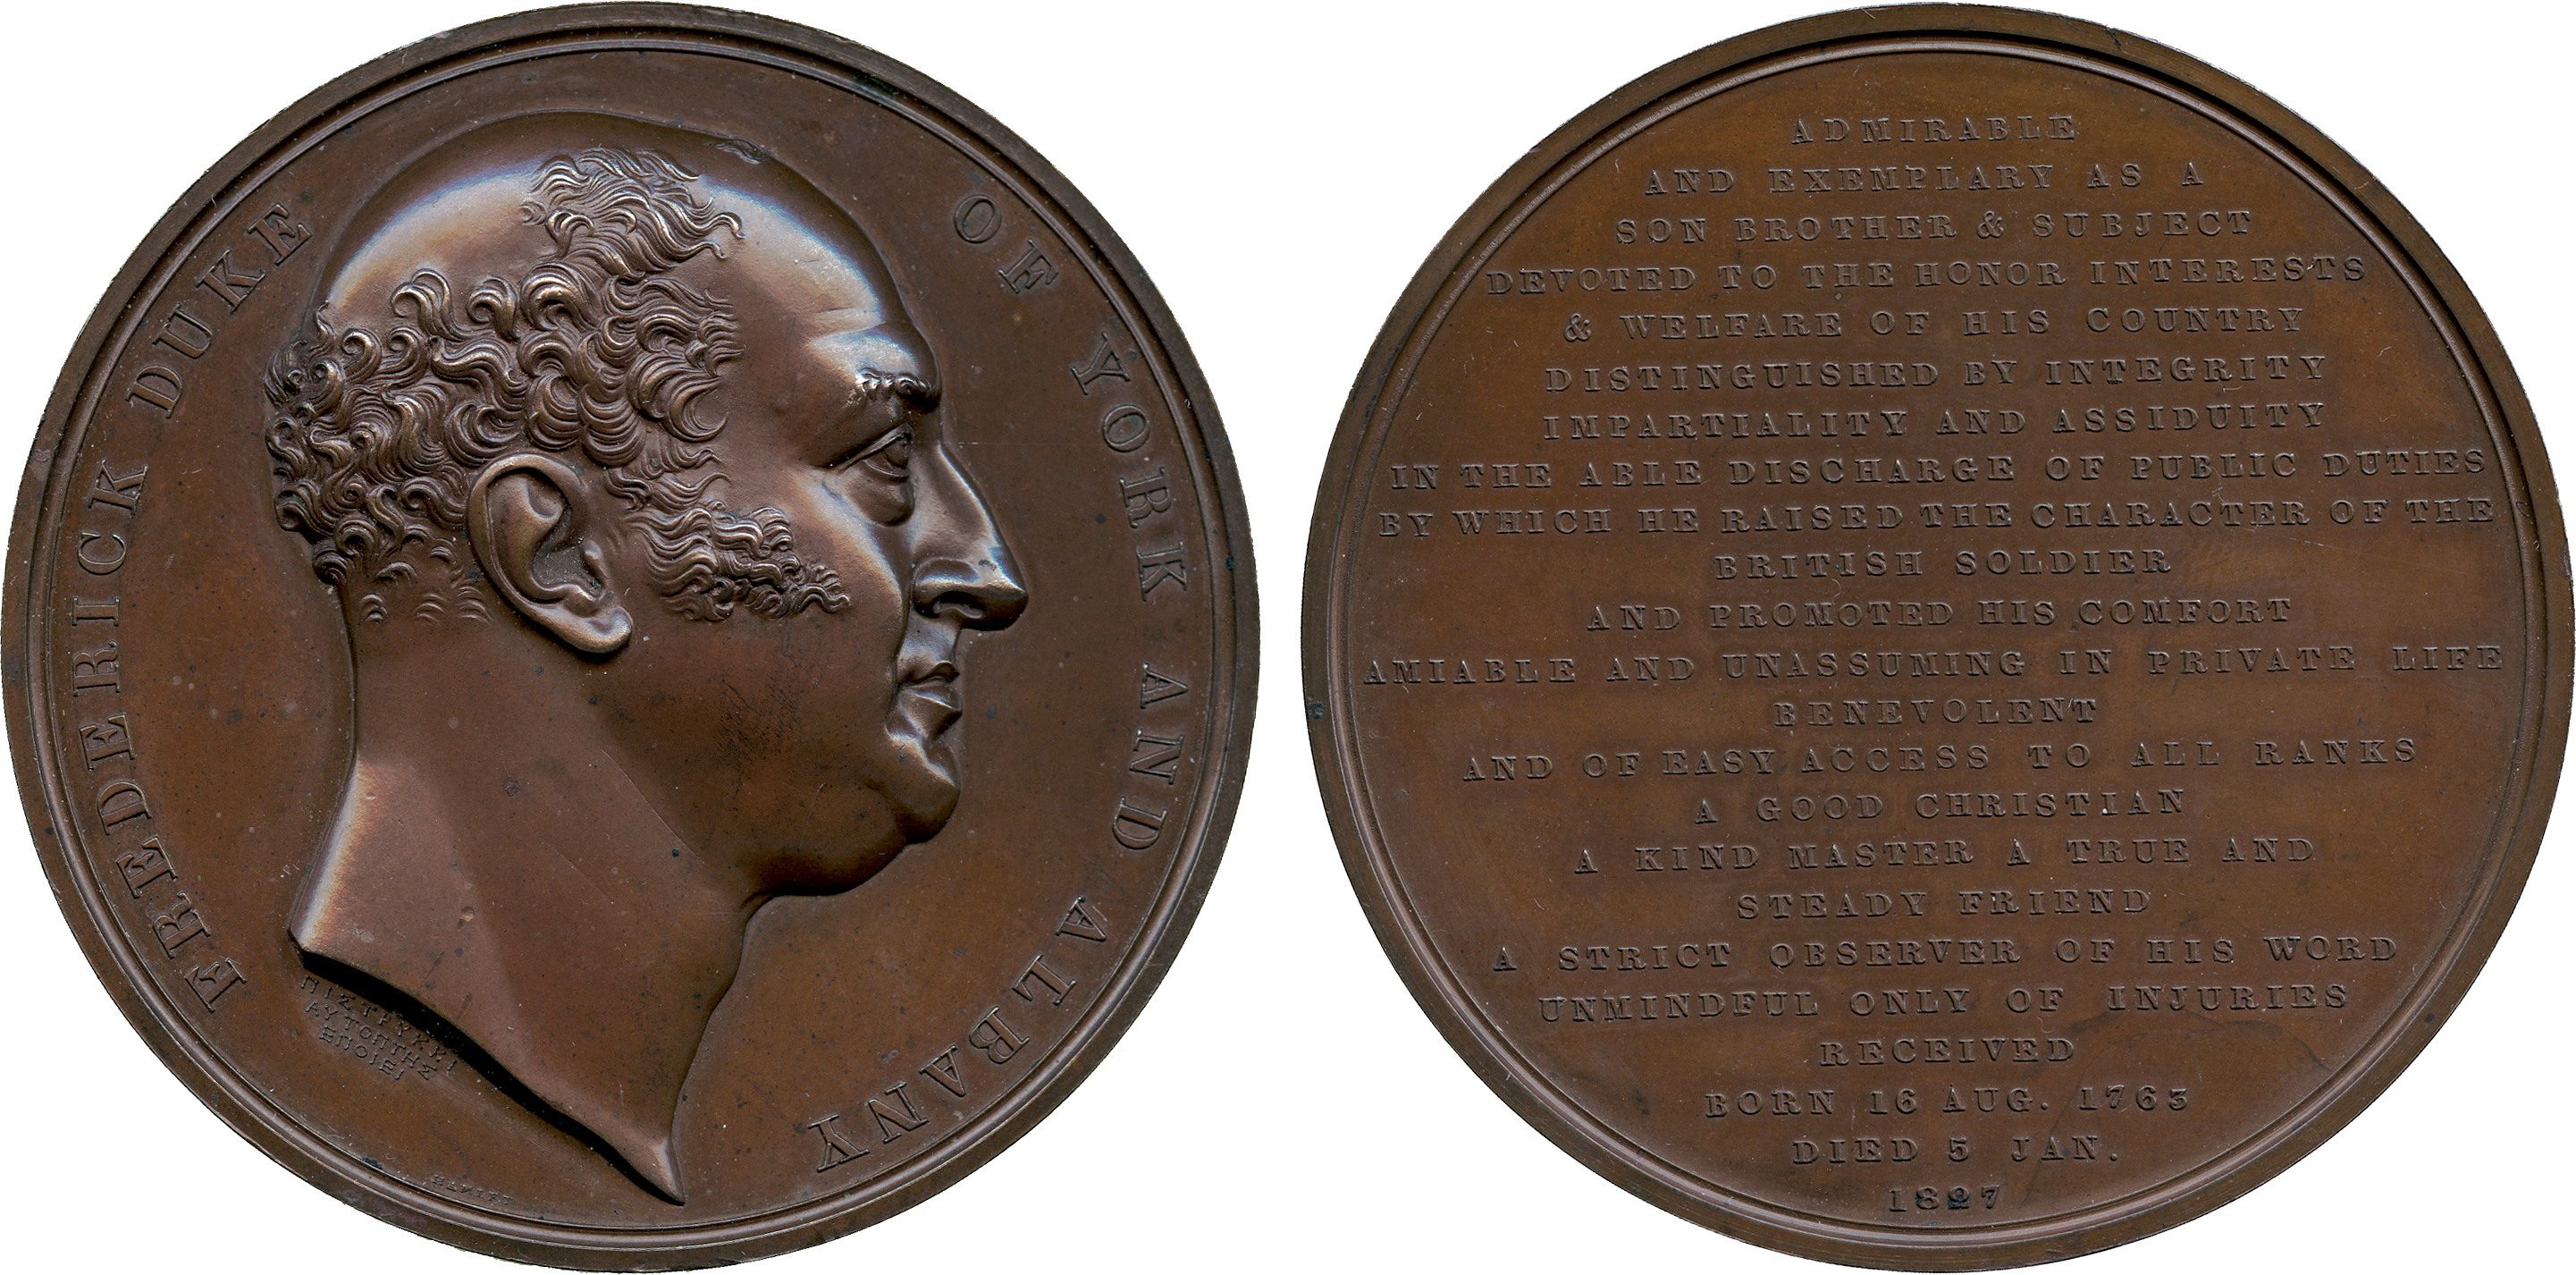 COMMEMORATIVE MEDALS, BRITISH MEDALS, Medals by Benetto Pistrucci (1783-1855), Frederick, Duke of